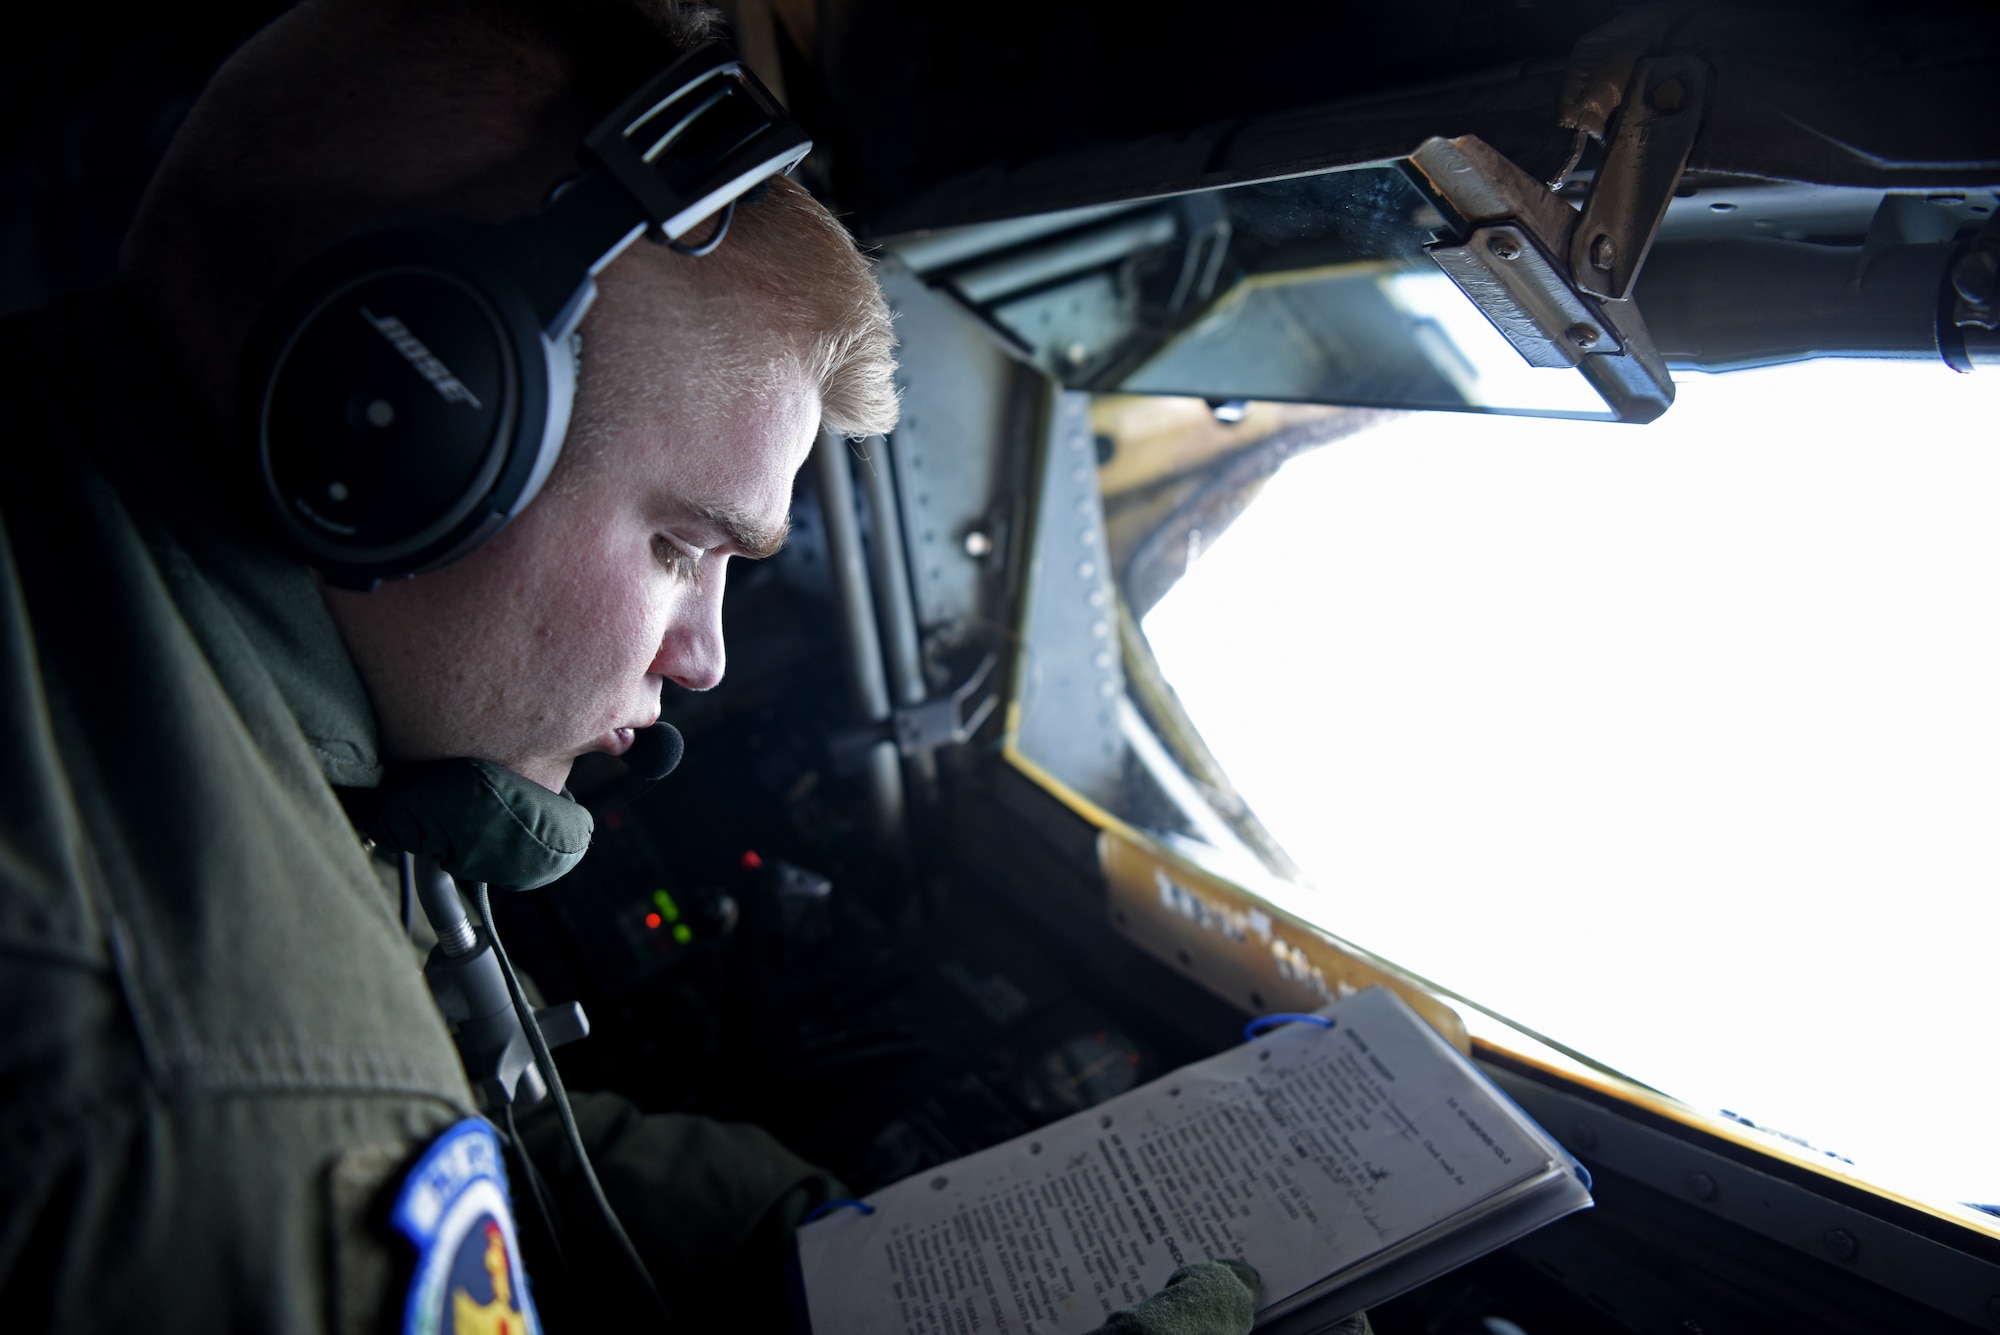 U.S. Air Force Airman 1st Class Alex Bengel, 351st Air Refueling Squadron boom operator, performs aerial refueling checklist during exercise Astral Knight over the skies of Italy, June 3, 2019. AK19 is a joint, multinational exercise designed to test Integrated Air and Missile Defense capabilities and will involve a combination of flight operations and computer-assisted exercise scenarios. Participants include the U.S. Air Forces in Europe, U.S. Army Europe forces, and members from the Italian and Croatian air forces. (U.S. Air Force photo by Airman 1st Class Brandon Esau)